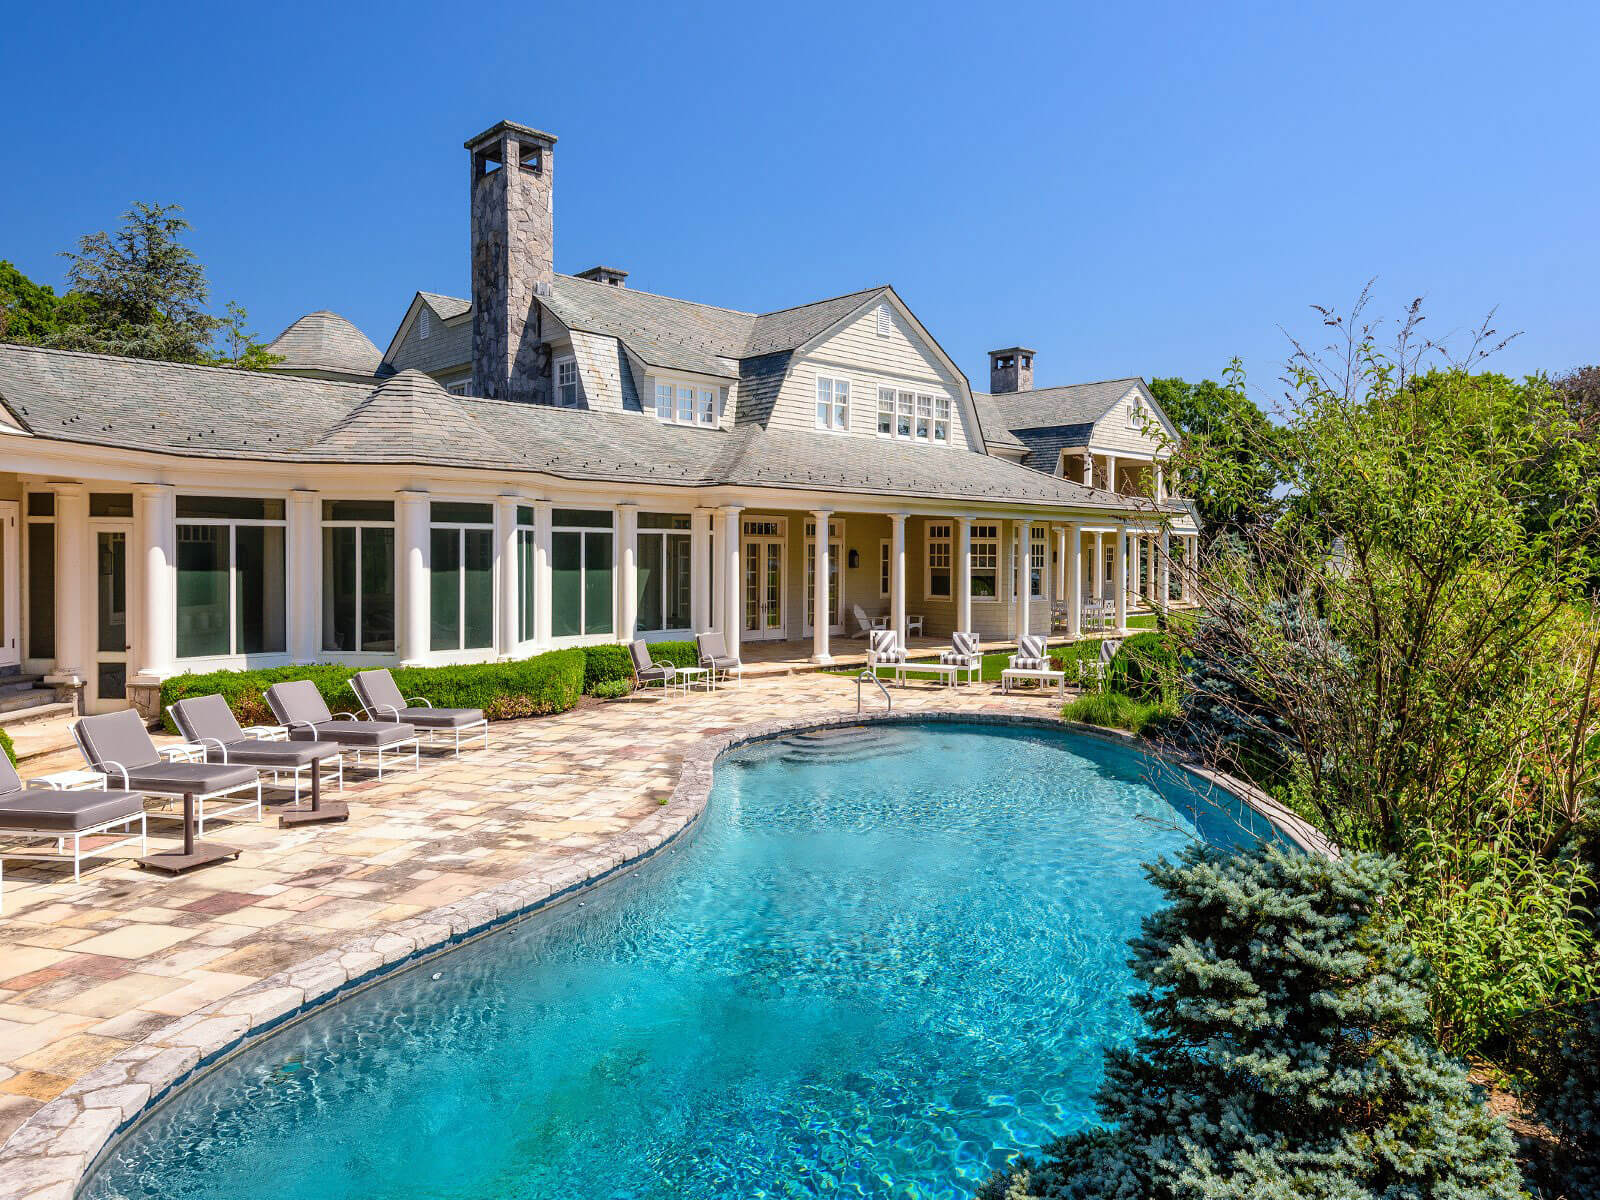 Burnt Point, Waterfront Estate in the Hamptons, NY | Frank E. Newbold • Sotheby's International Realty | Finest Residences